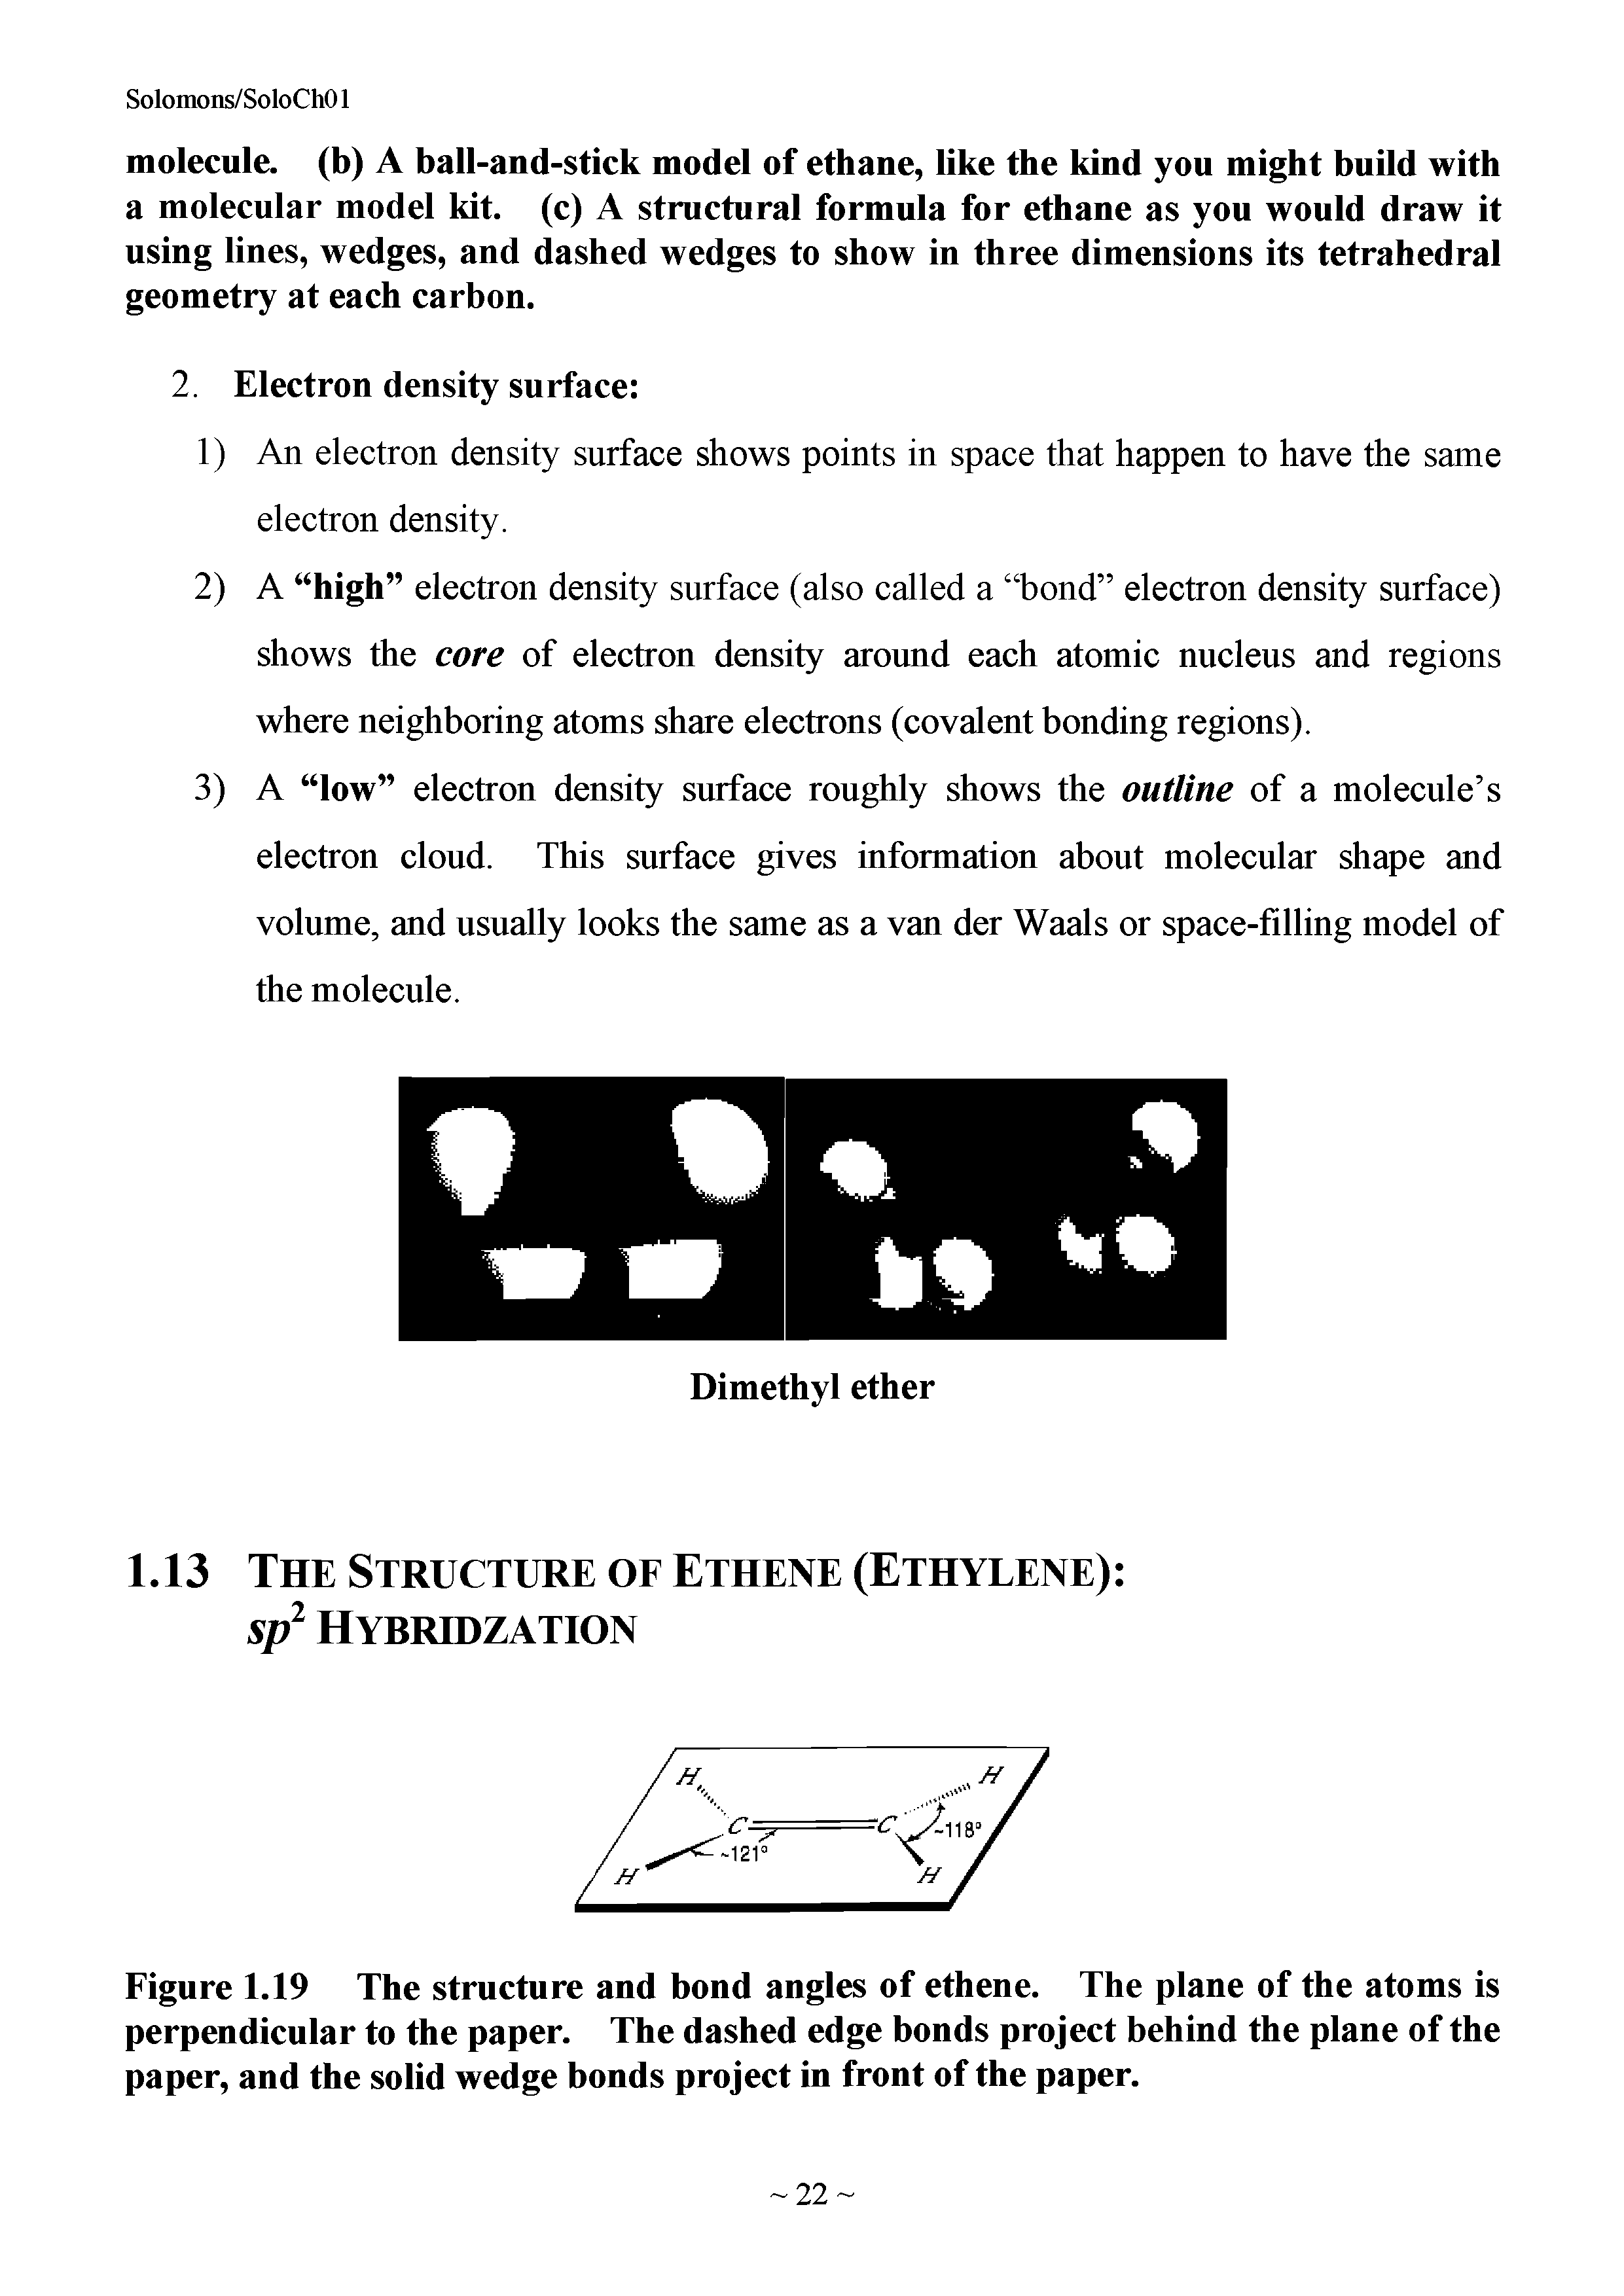 Figure 1.19 The structure and bond angles of ethene. The plane of the atoms is perpendicular to the paper. The dashed edge bonds project behind the plane of the paper, and the solid wedge bonds project in front of the paper.